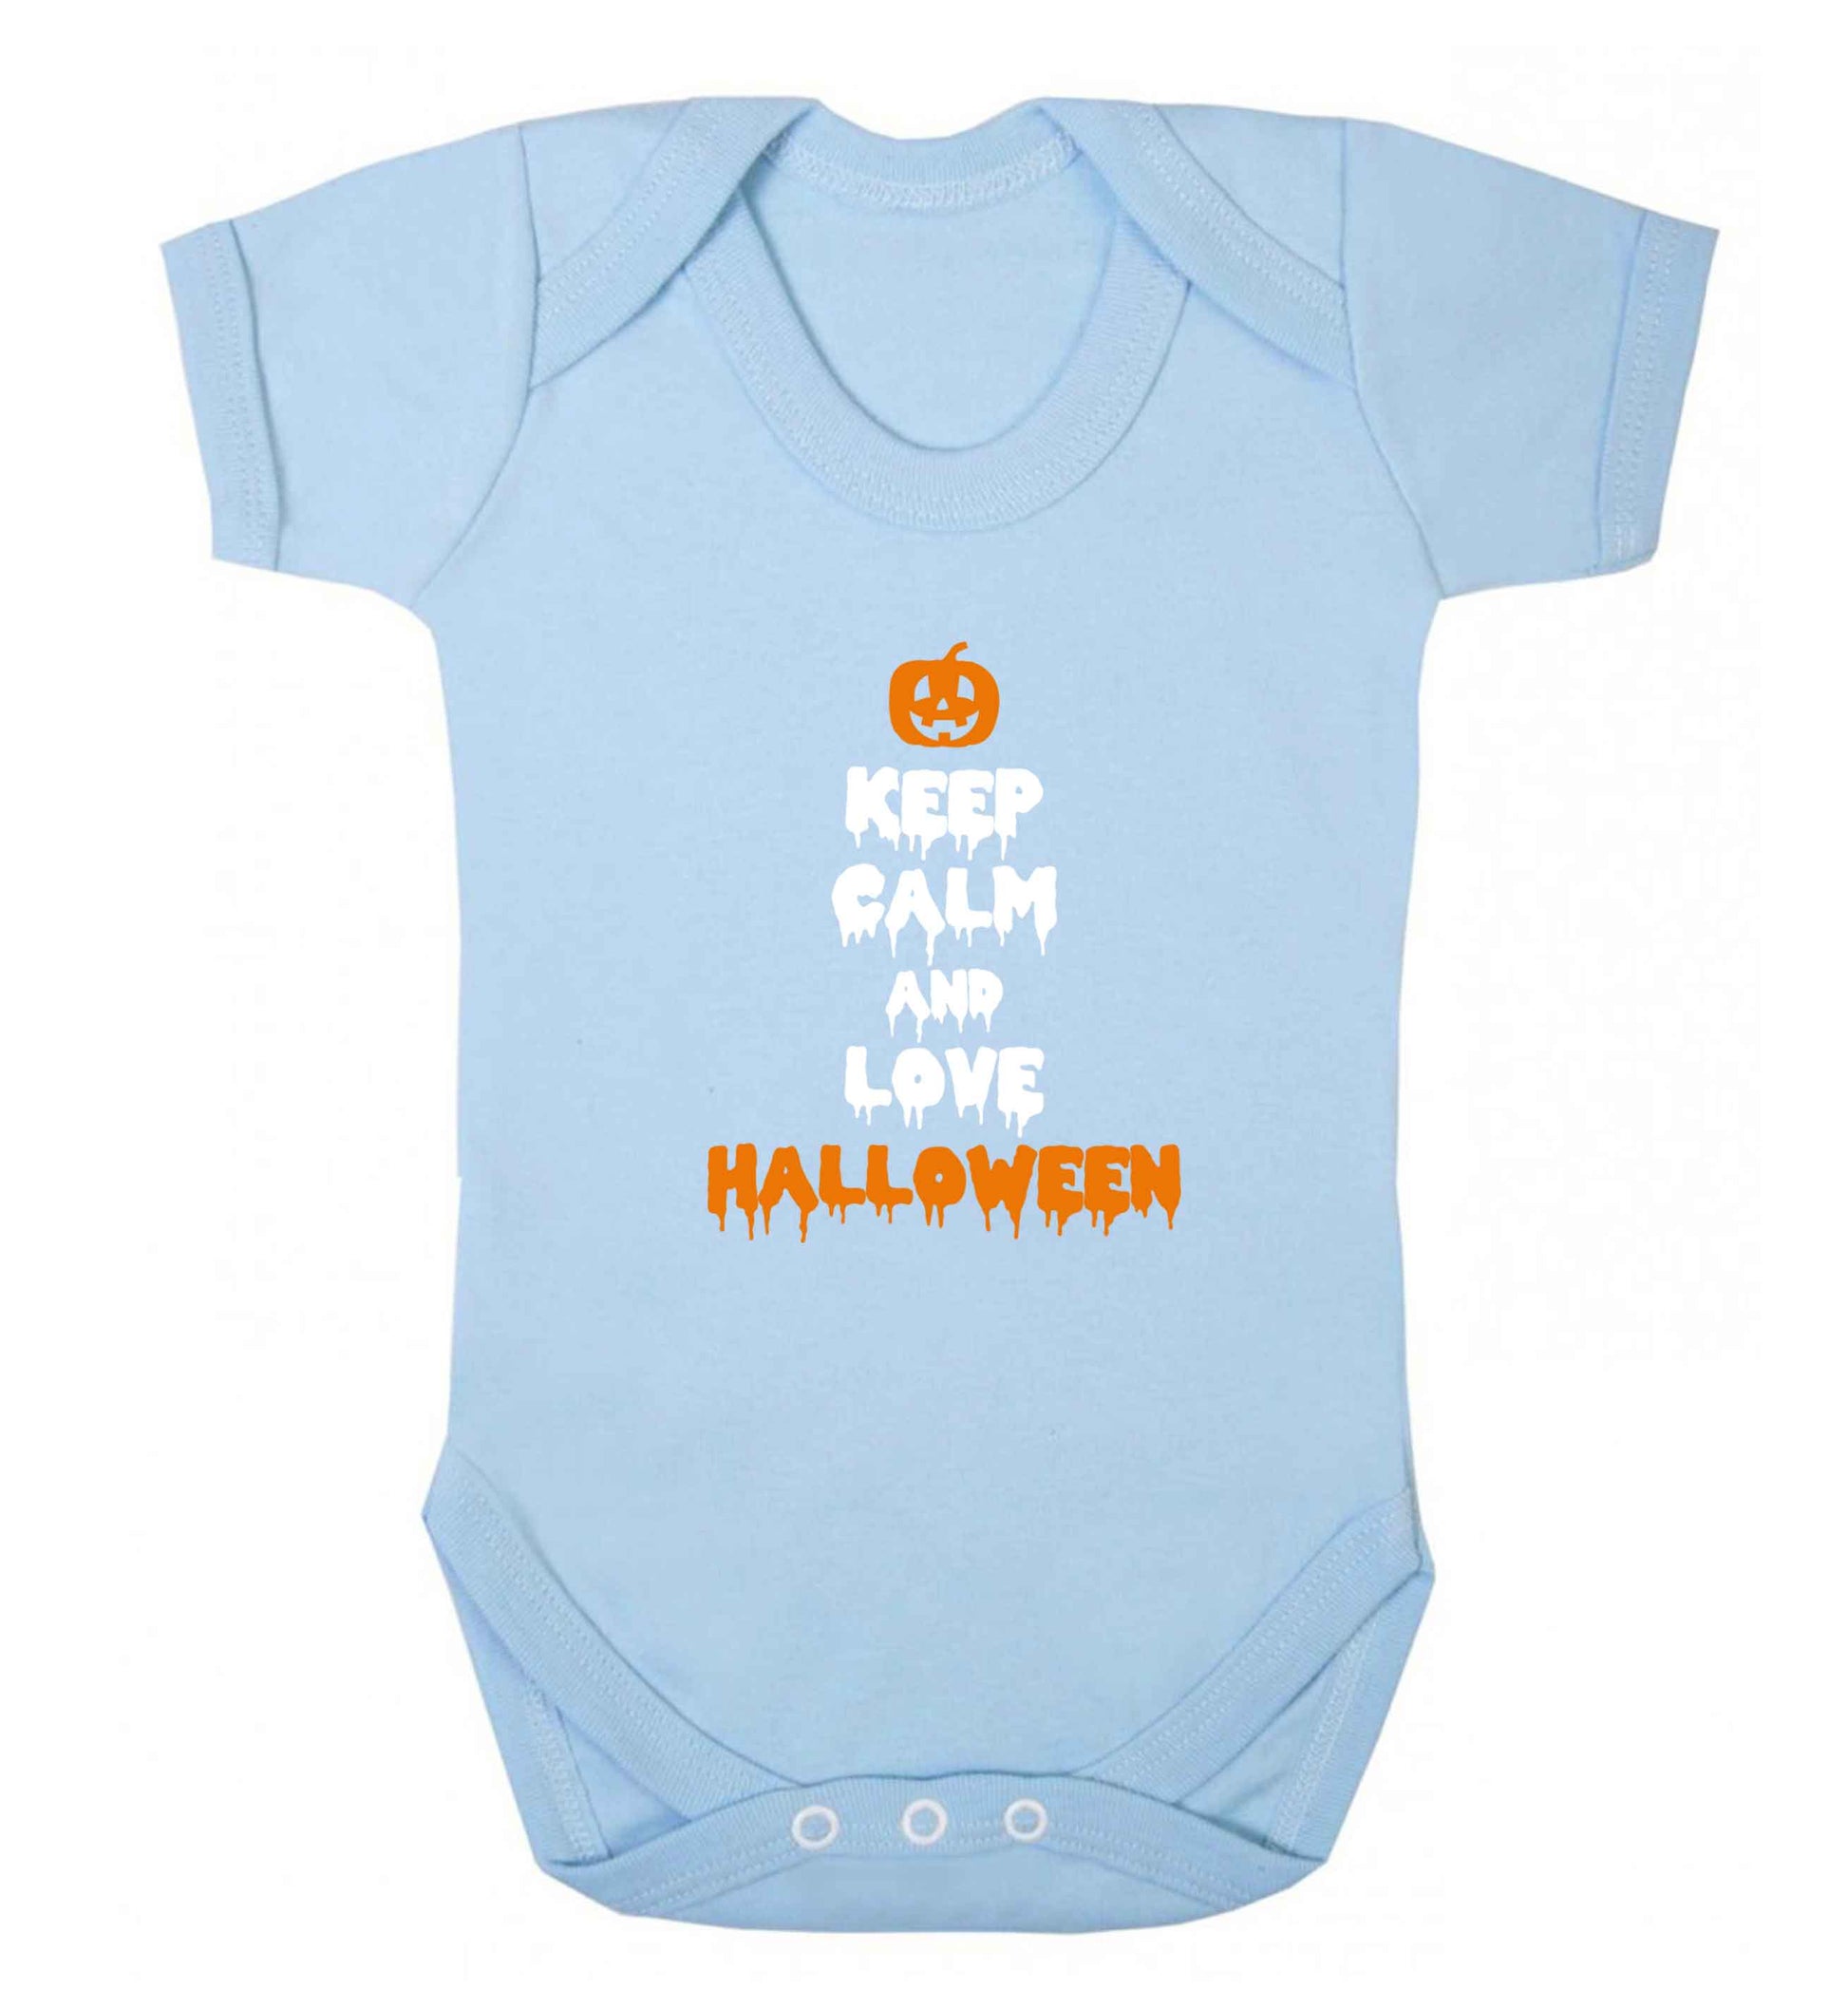 Keep calm and love halloween baby vest pale blue 18-24 months